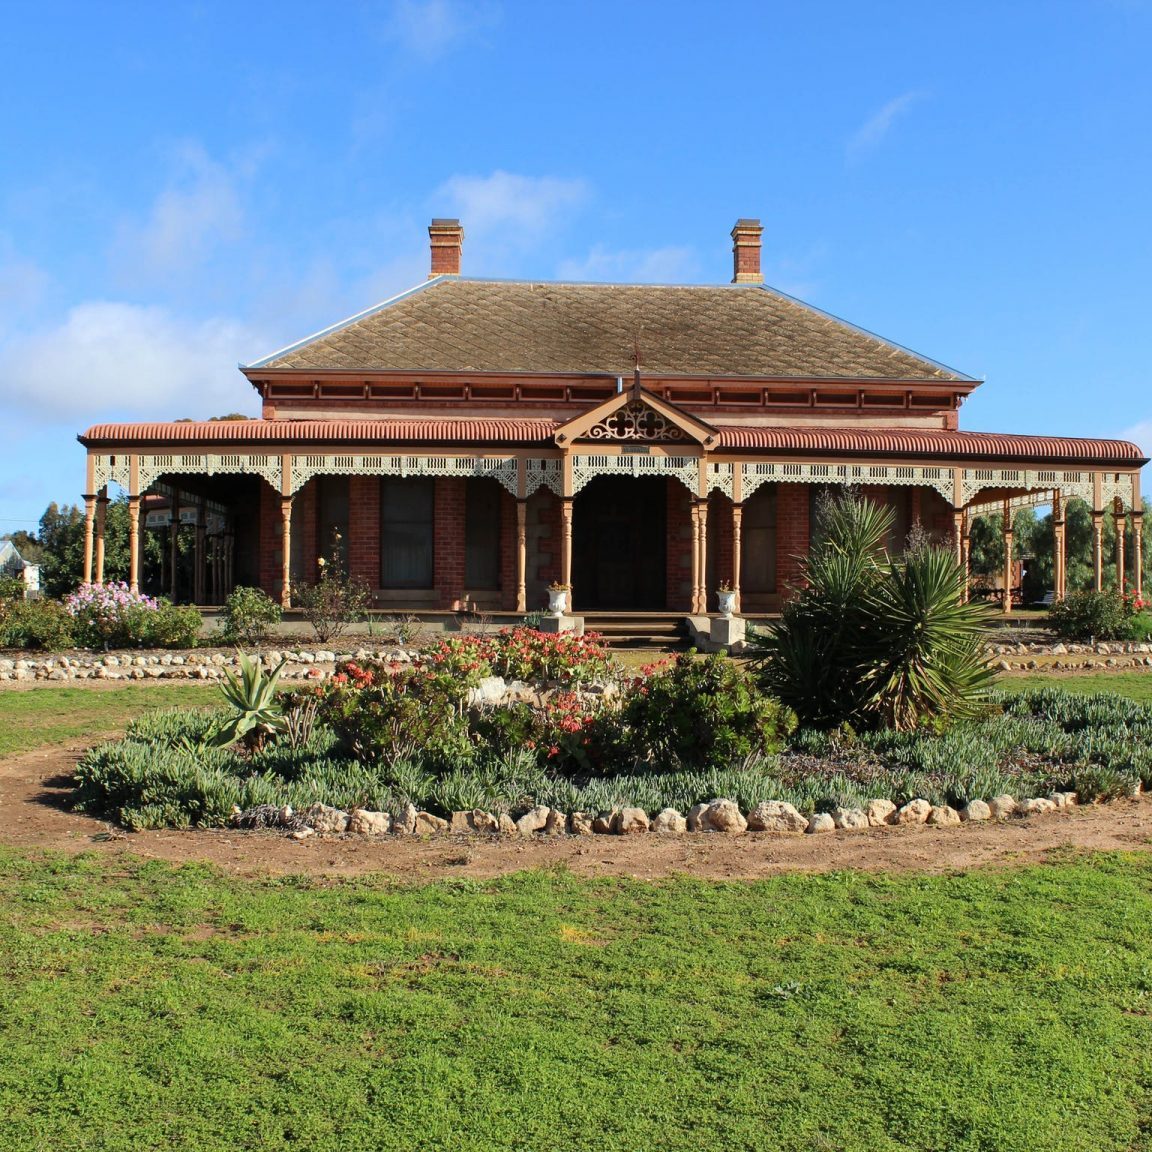 Front entrance and veranda of Georgian style heritage homestead with lawn and garden in foreground